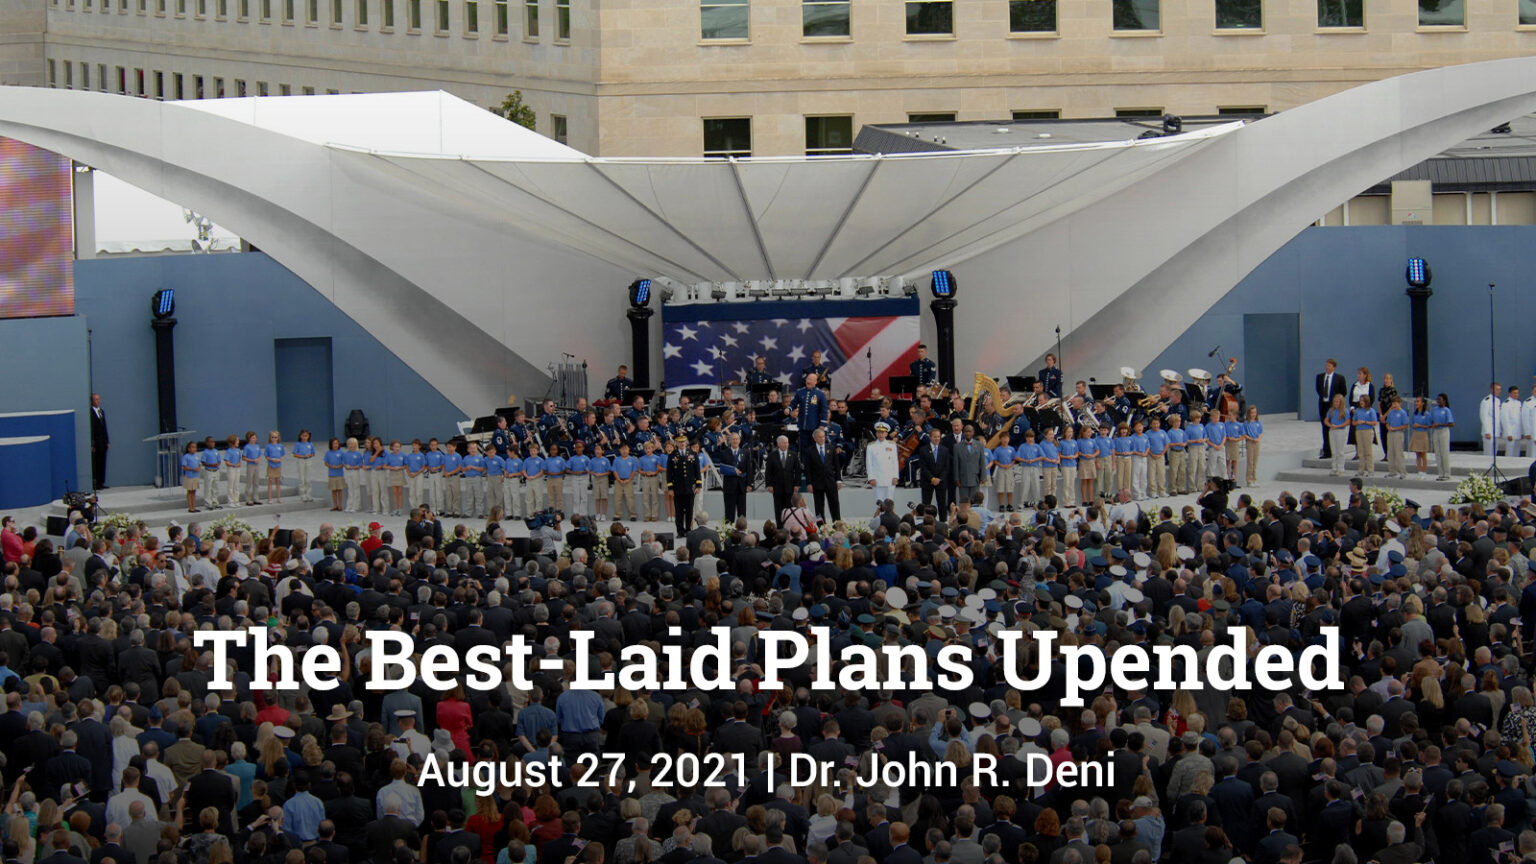  The Best-Laid Plans Upended | Deni